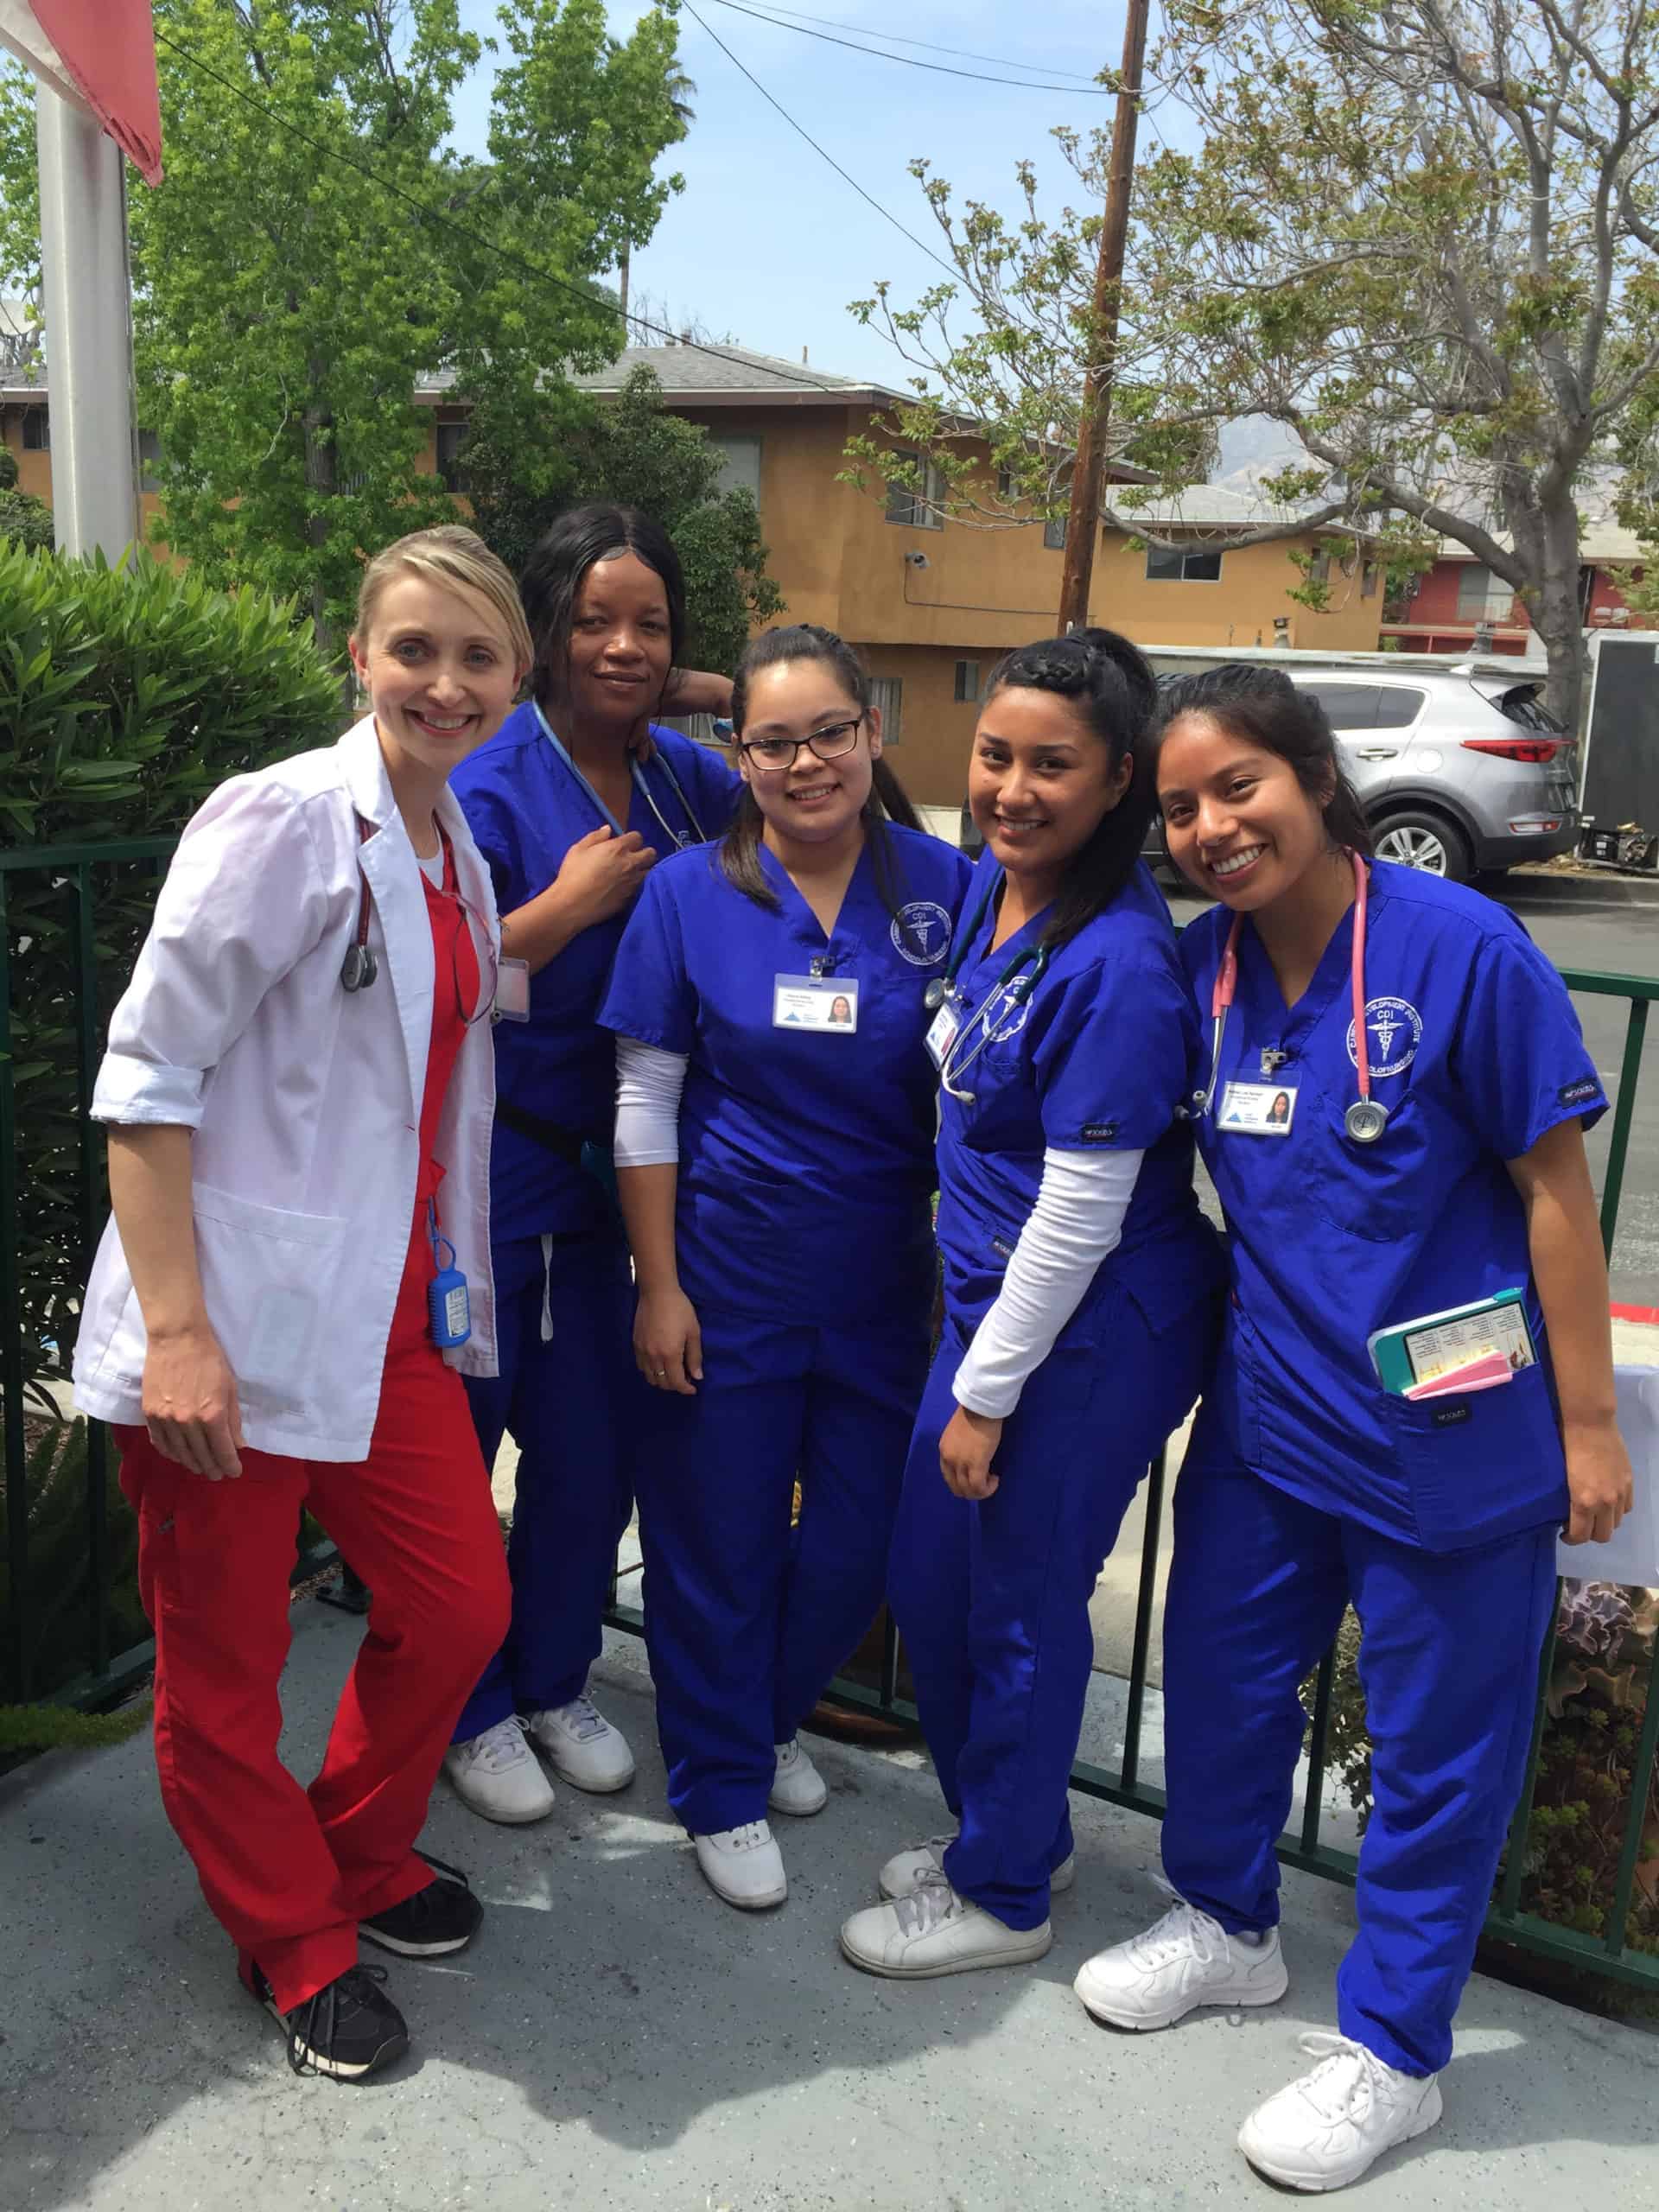 CDI Students at Clinicals Smiling with Instructor